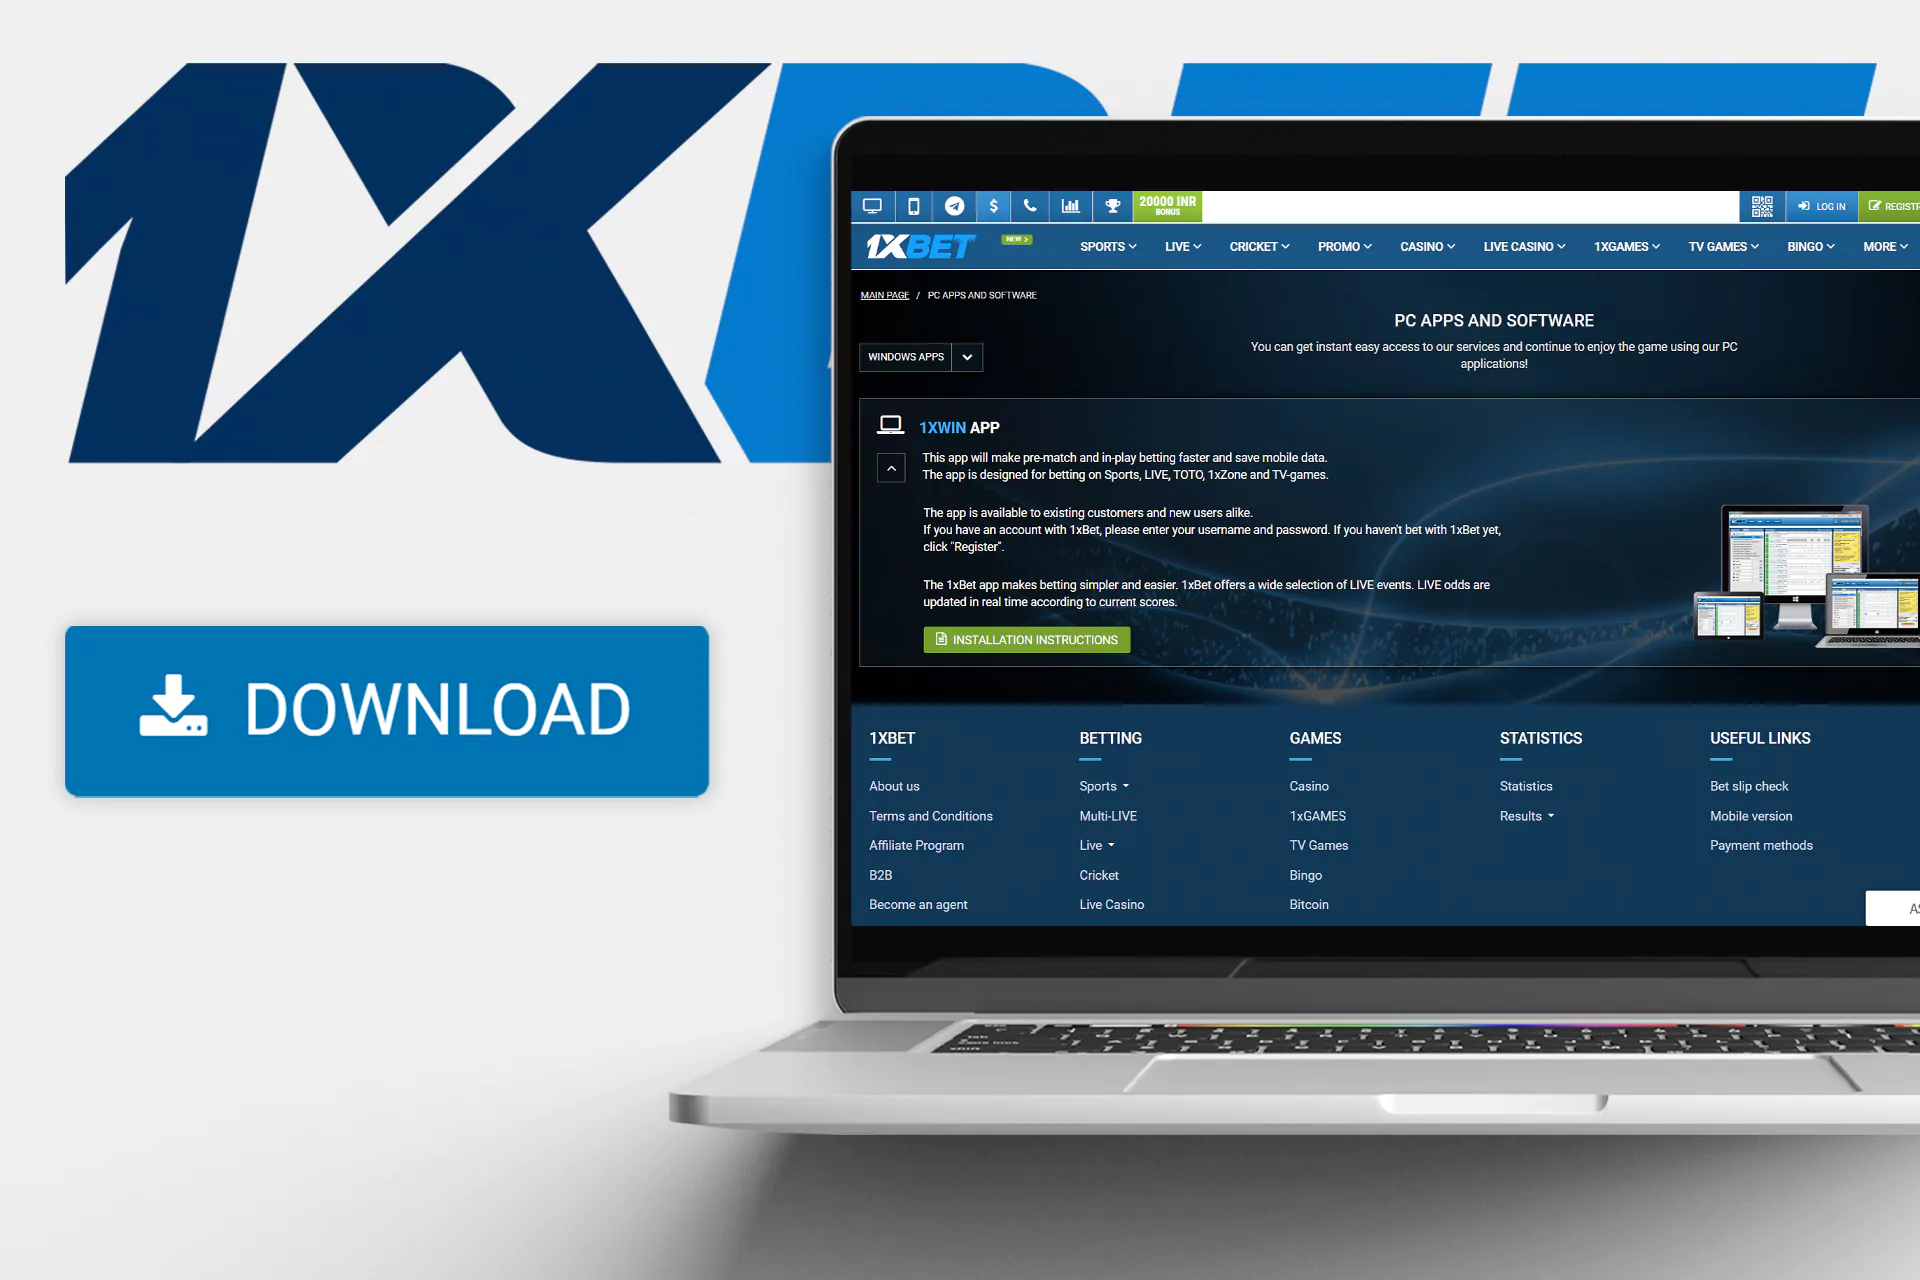 Download the current version of 1xBet for PC from the official site.